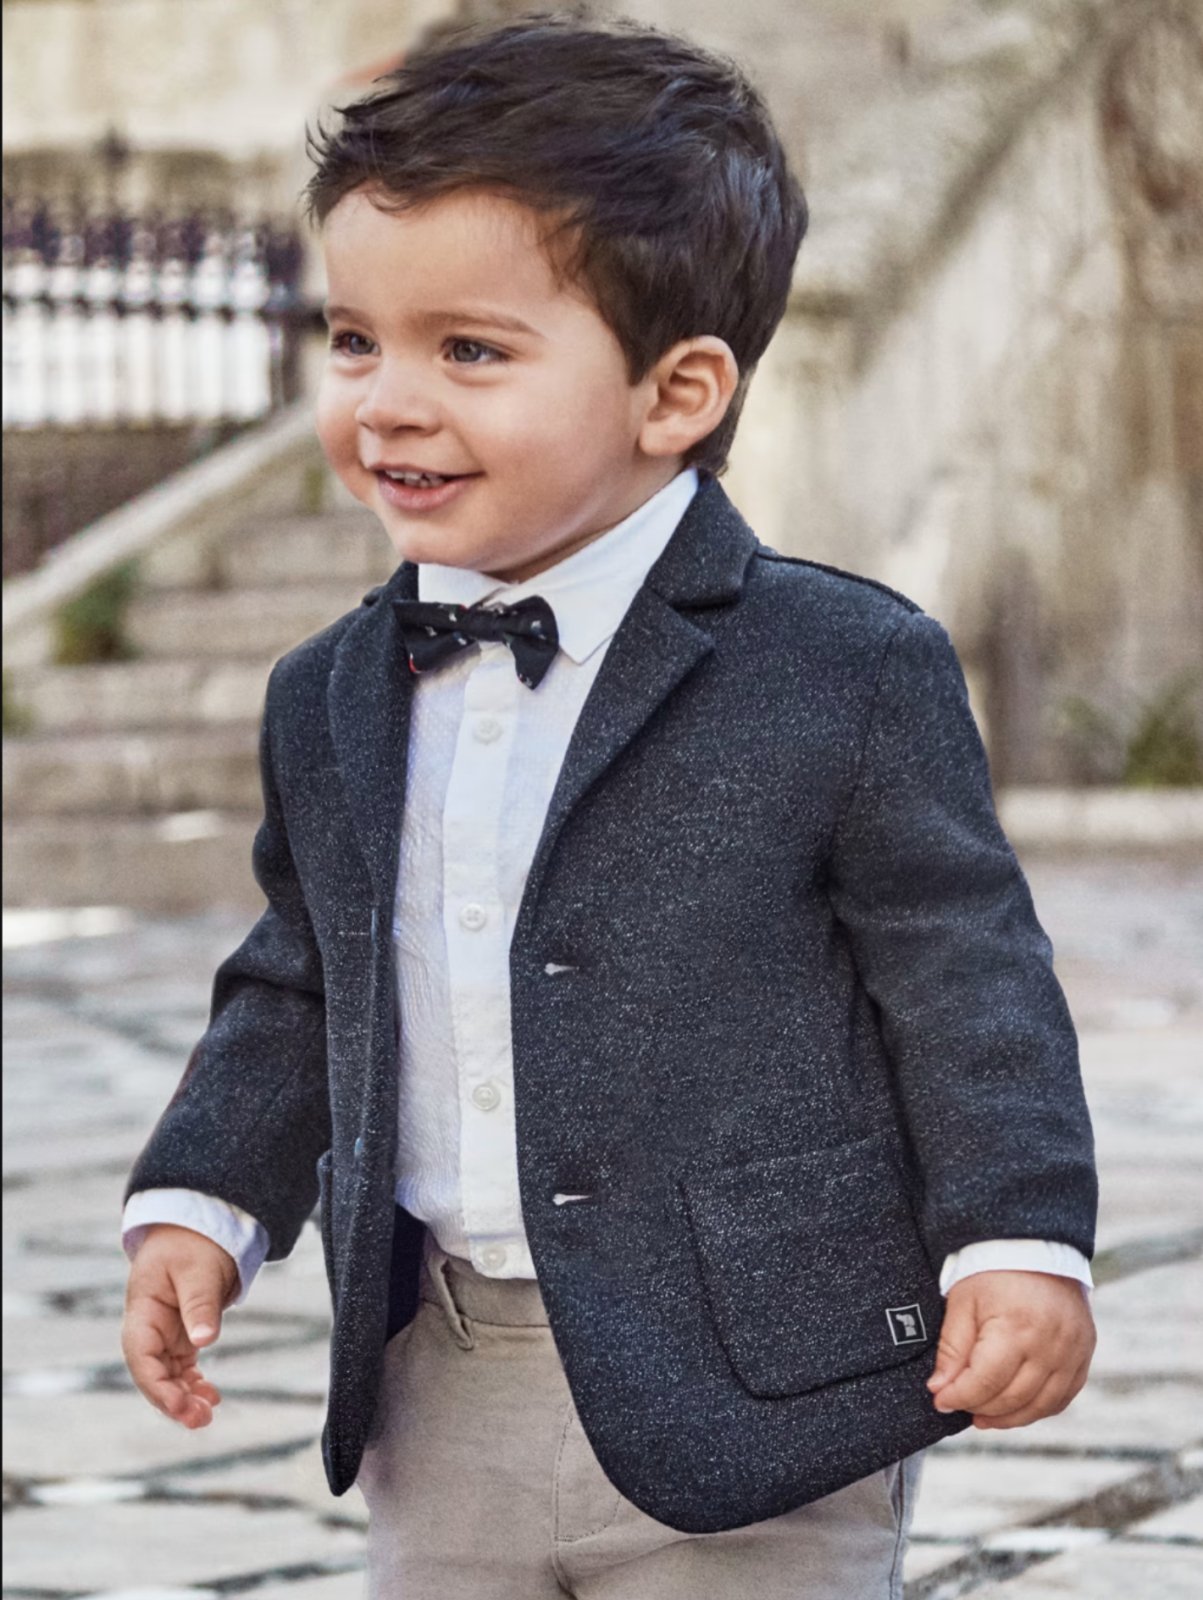 Boys Formal 5 Piece Suit with Shirt and Vest - Slate Gray - Little Things  Mean a Lot